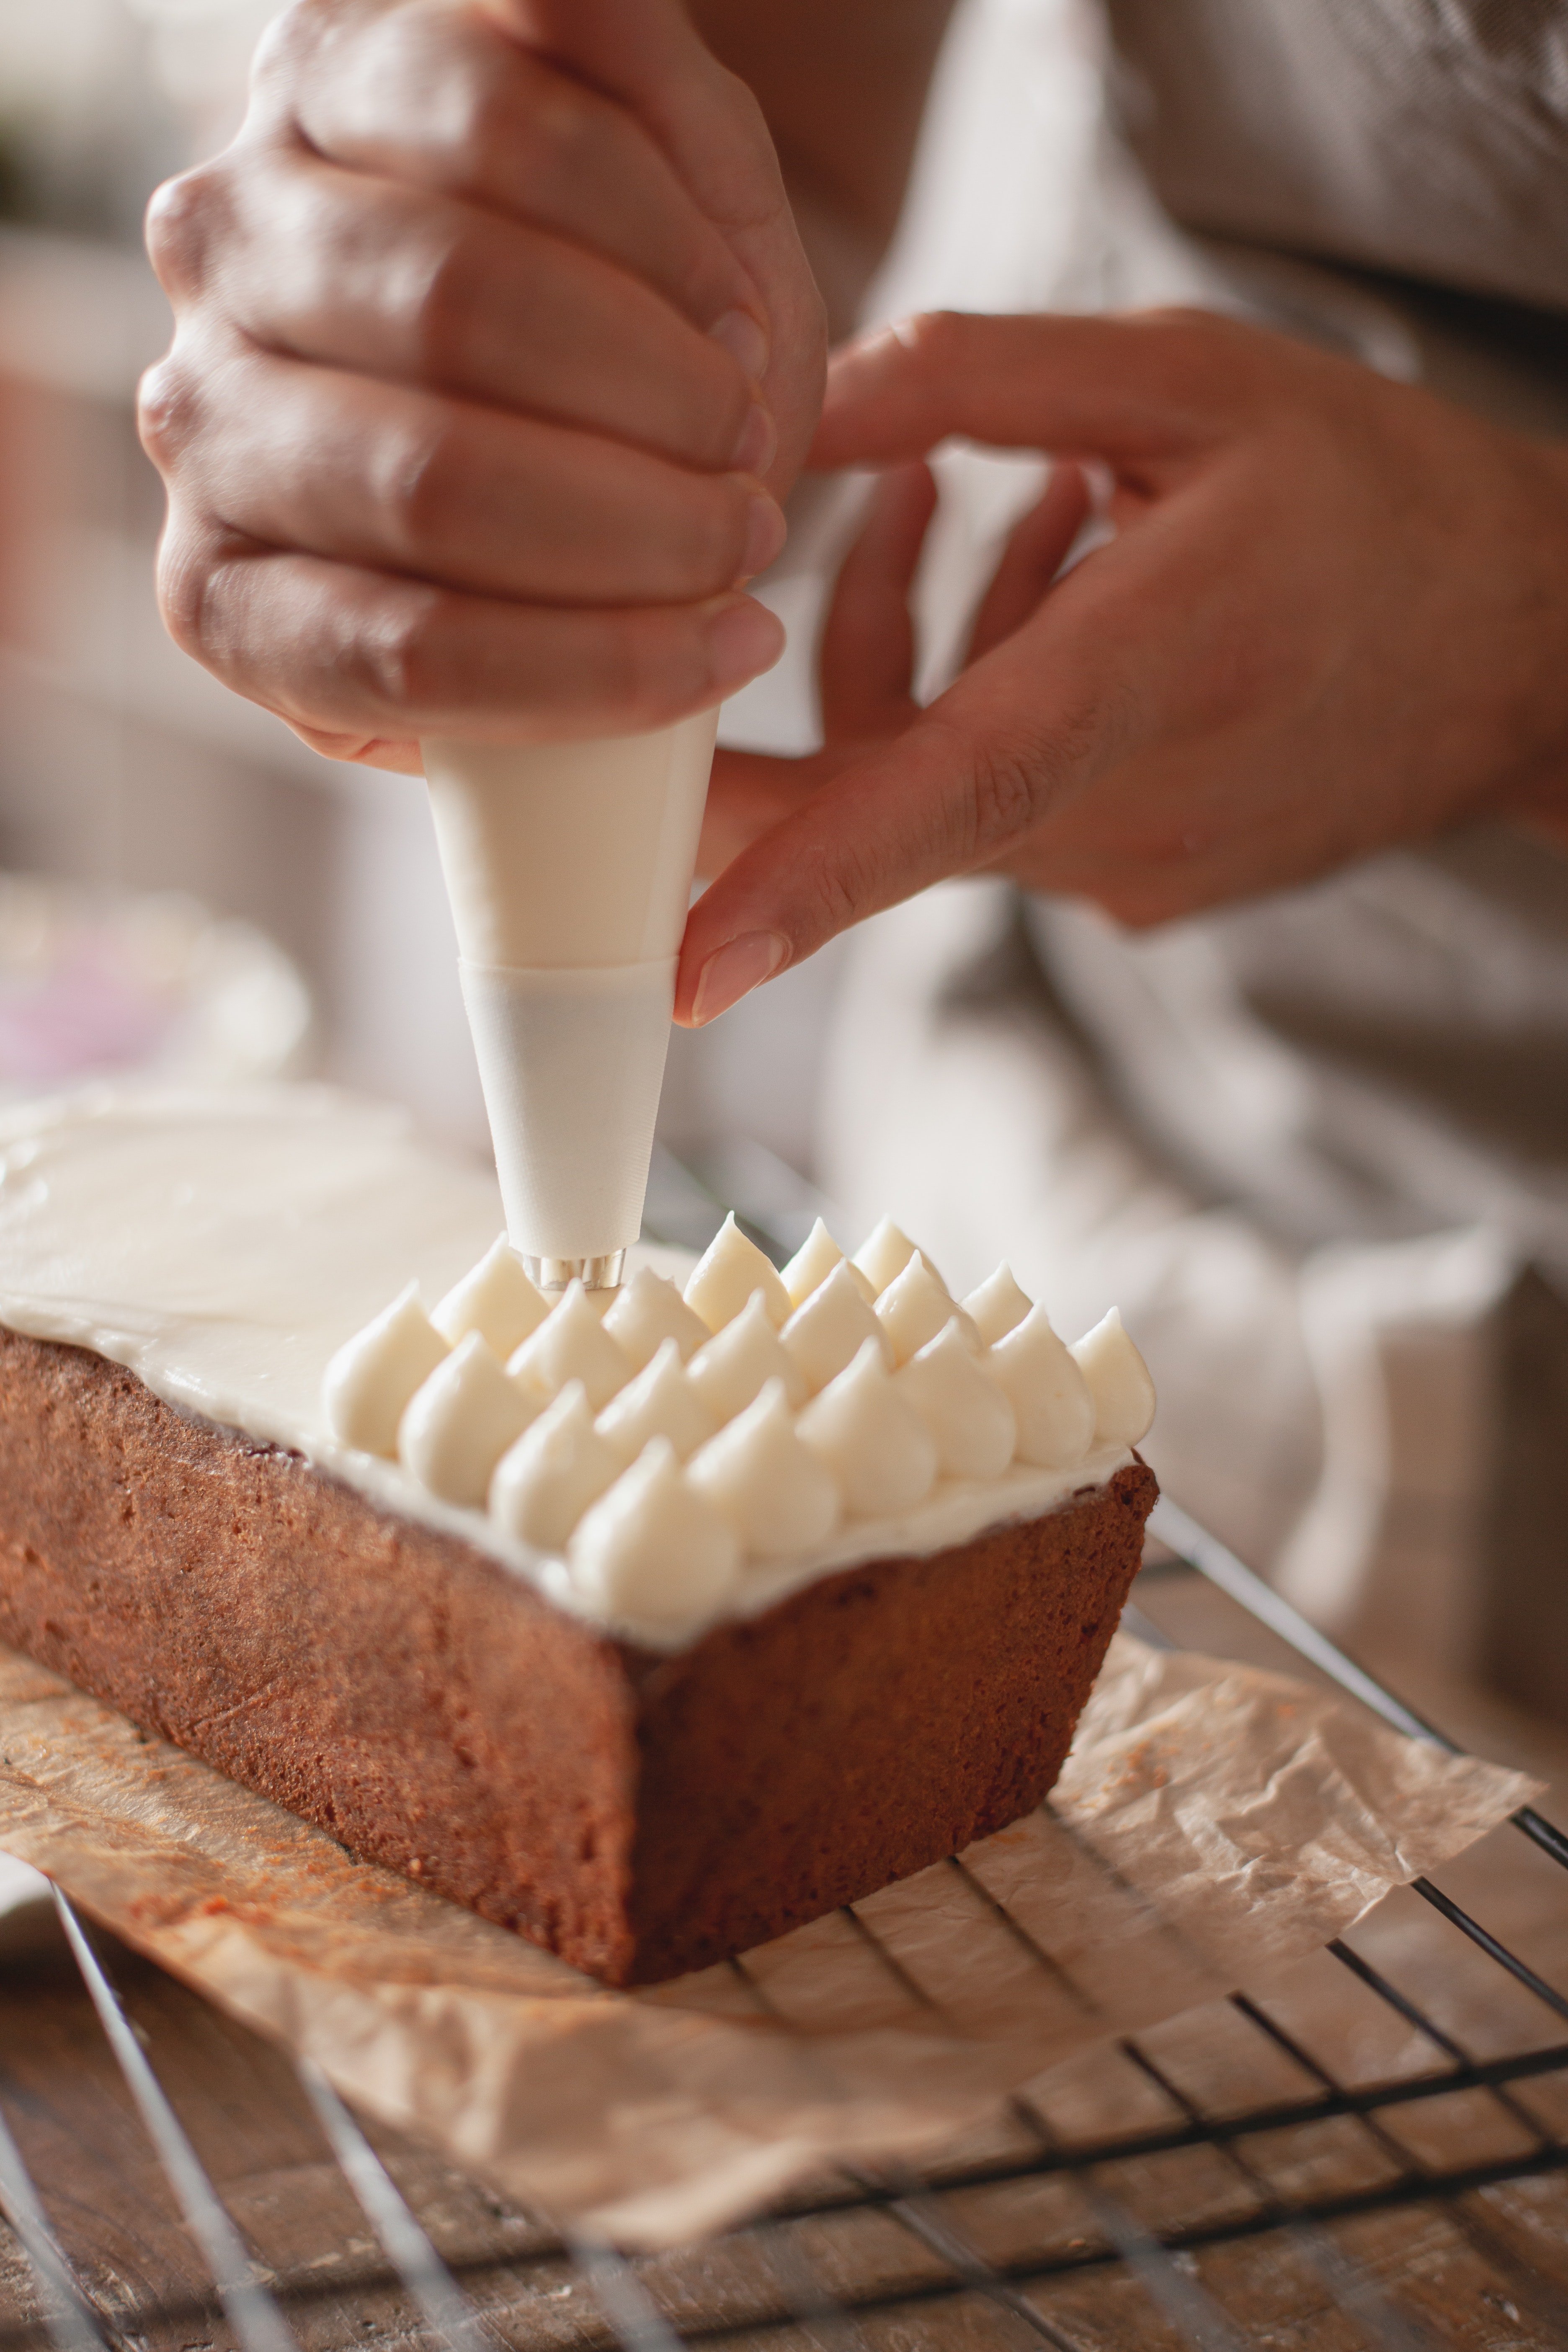 She had loved baking before the incident, but after her husband's death, she had turned to it fully, pouring all her emotions into the beautiful little cakes she baked | Source: Pexels